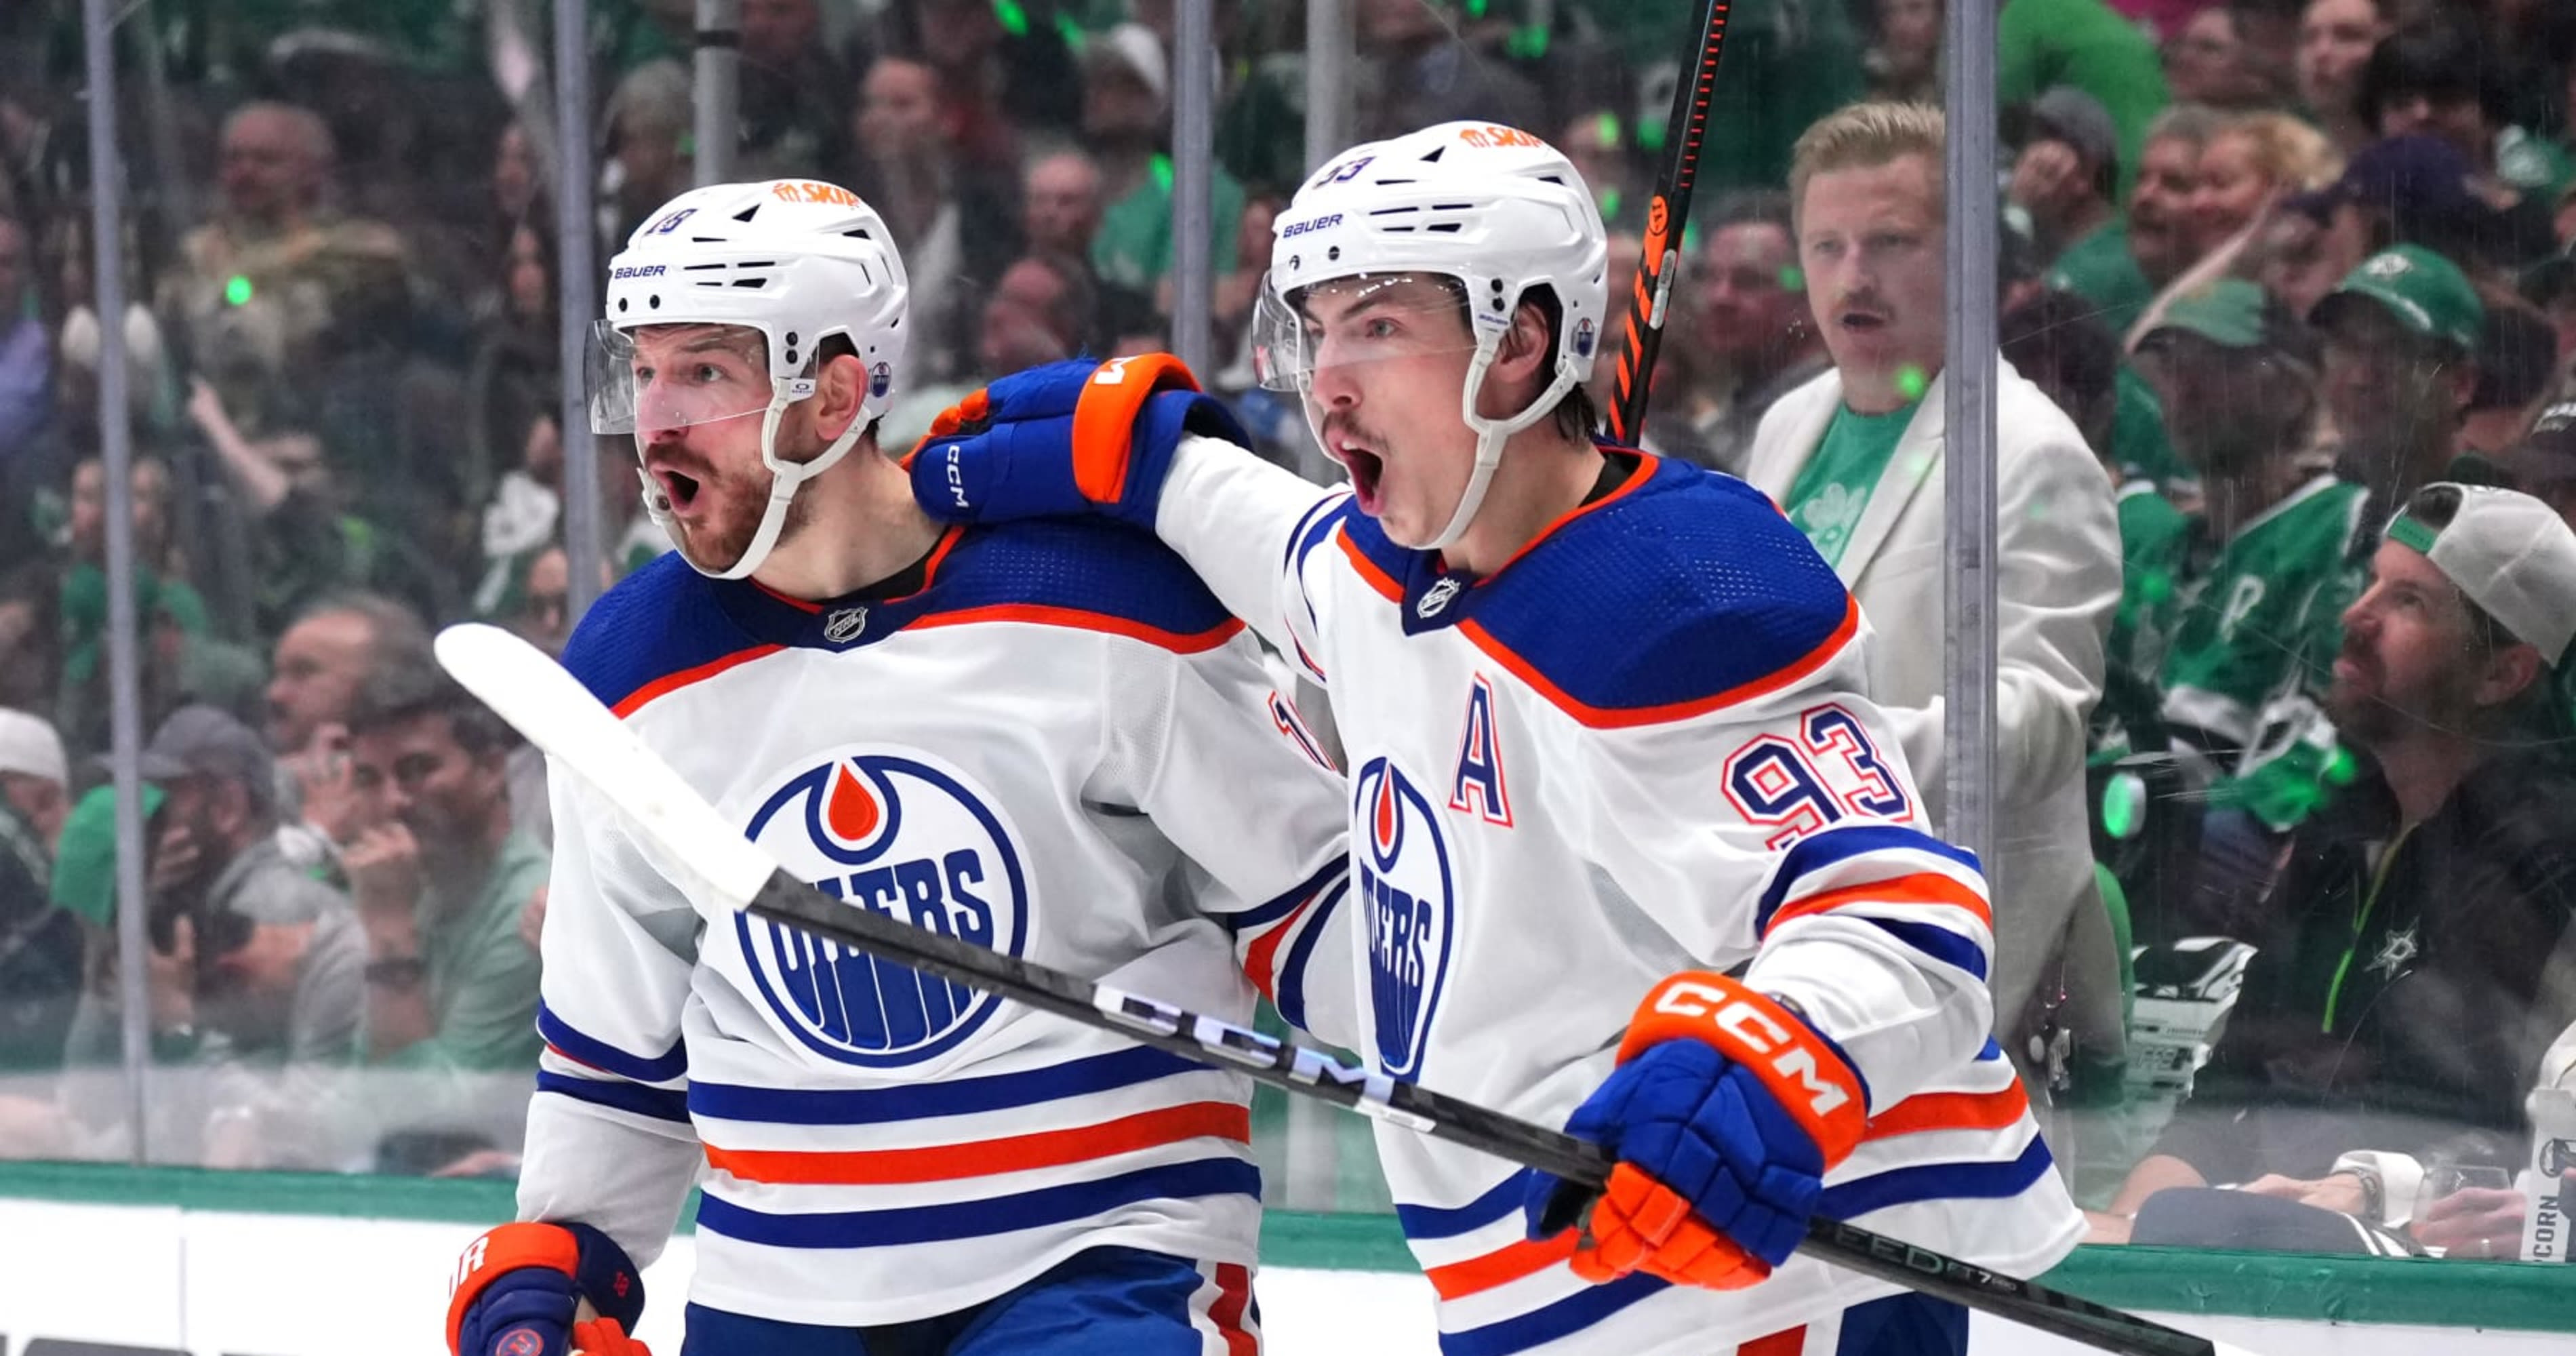 Oilers' Connor McDavid Electrifies NHL Fans with Goal in 2OT to Win Game 1 vs. Stars